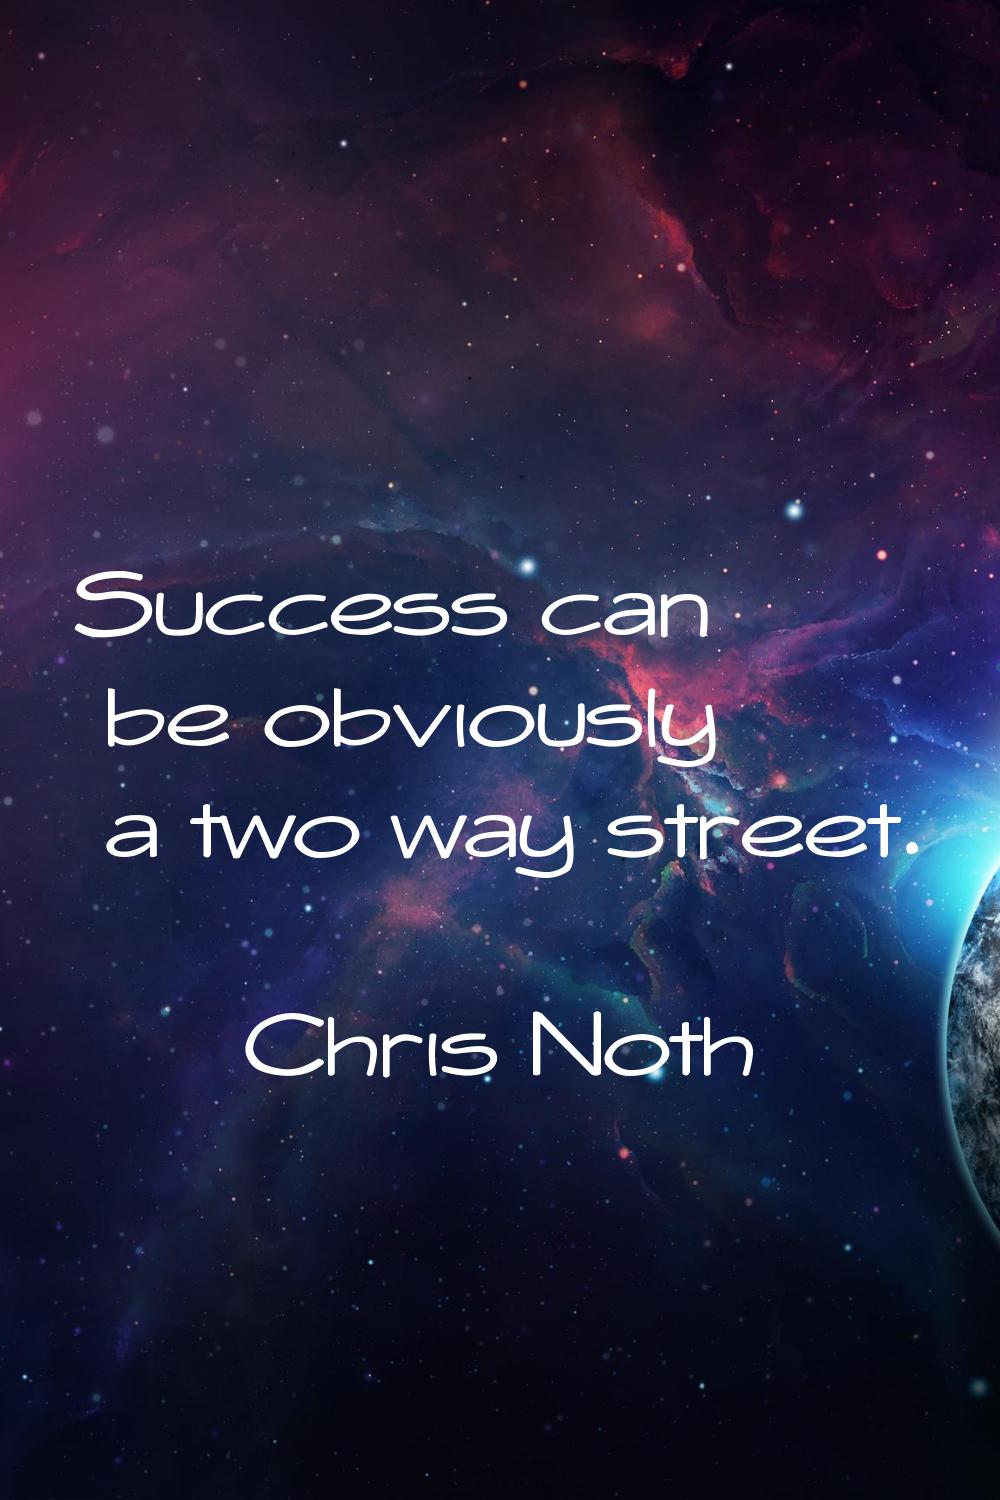 Success can be obviously a two way street.